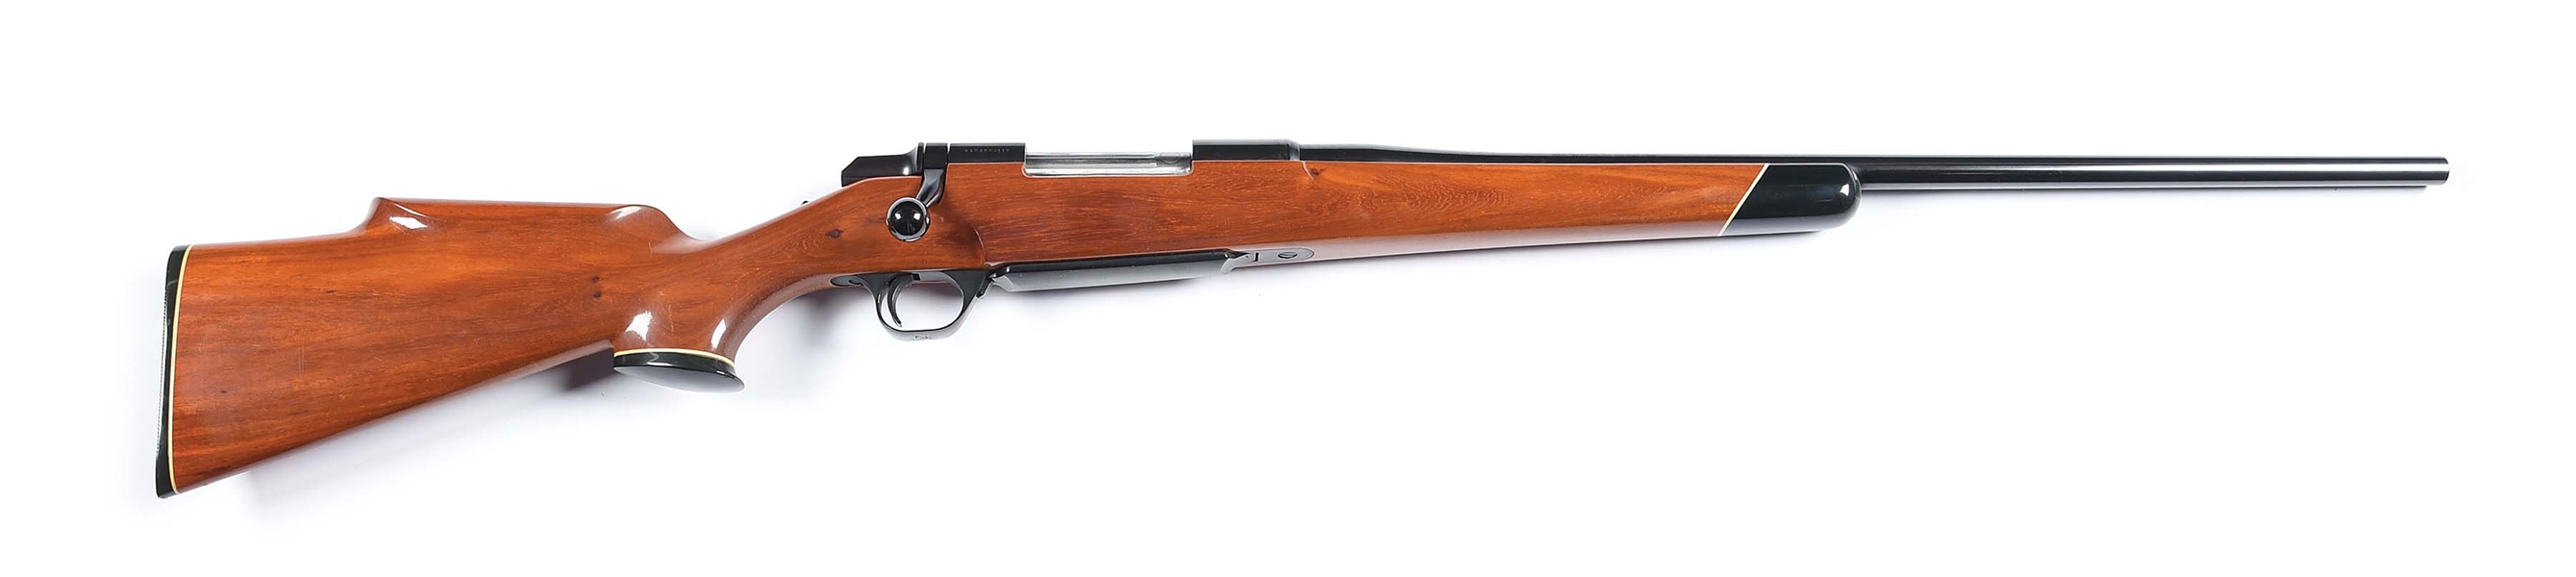 (M) BROWNING BBR BOLT ACTION RIFLE WITH NARRA/ PTEROCARPUS INDICUS STOCK.